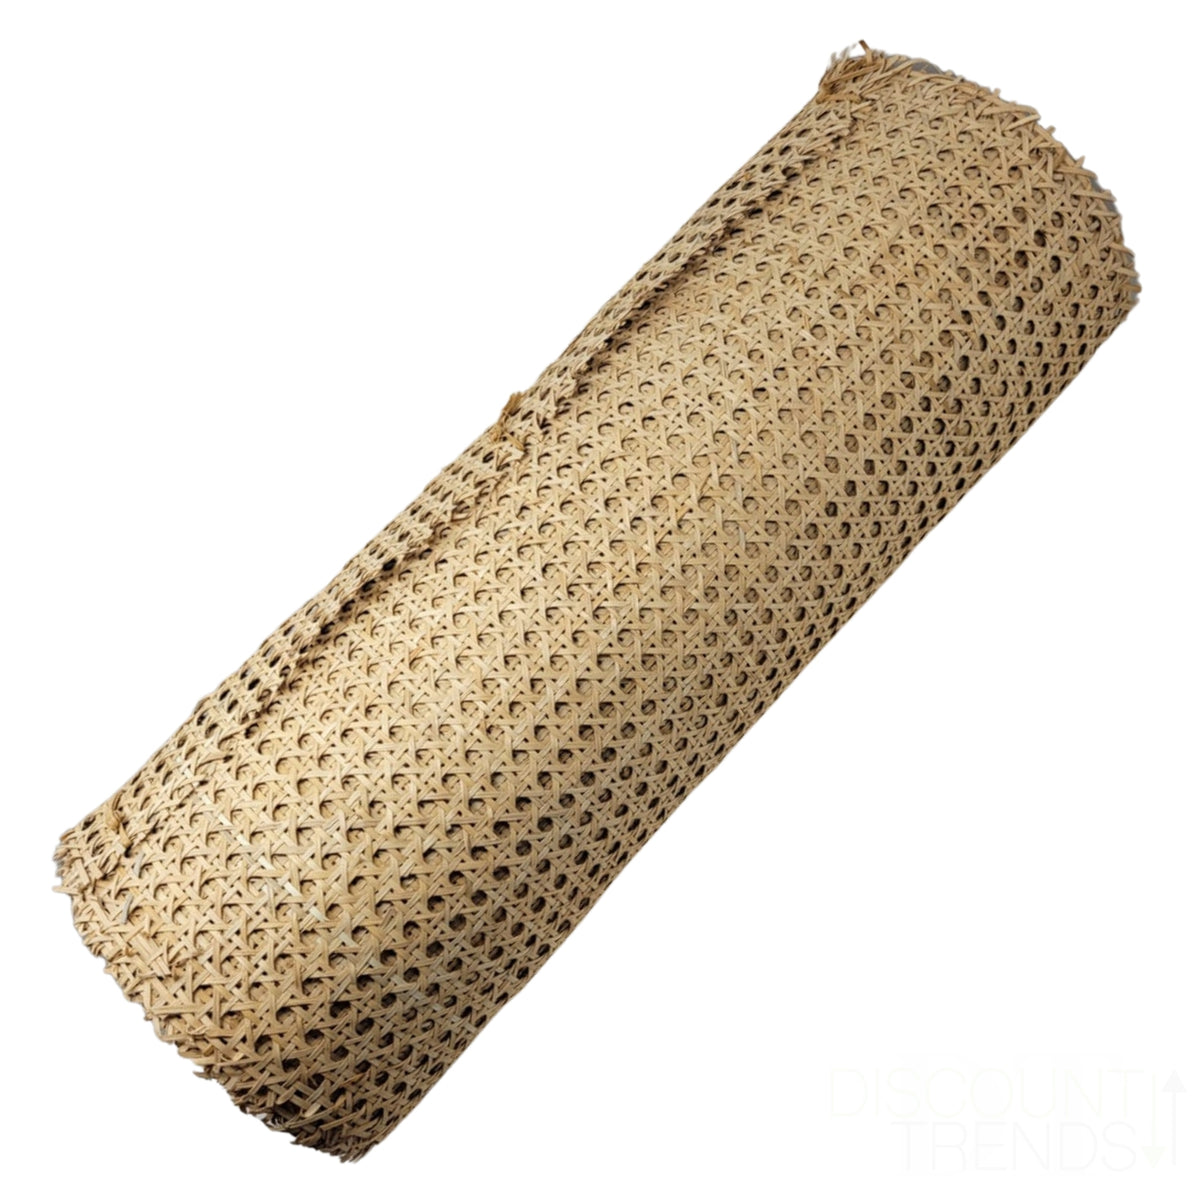 36 Wide Semi-Bleached Rattan Square Cane Webbing Radio Mesh Caning